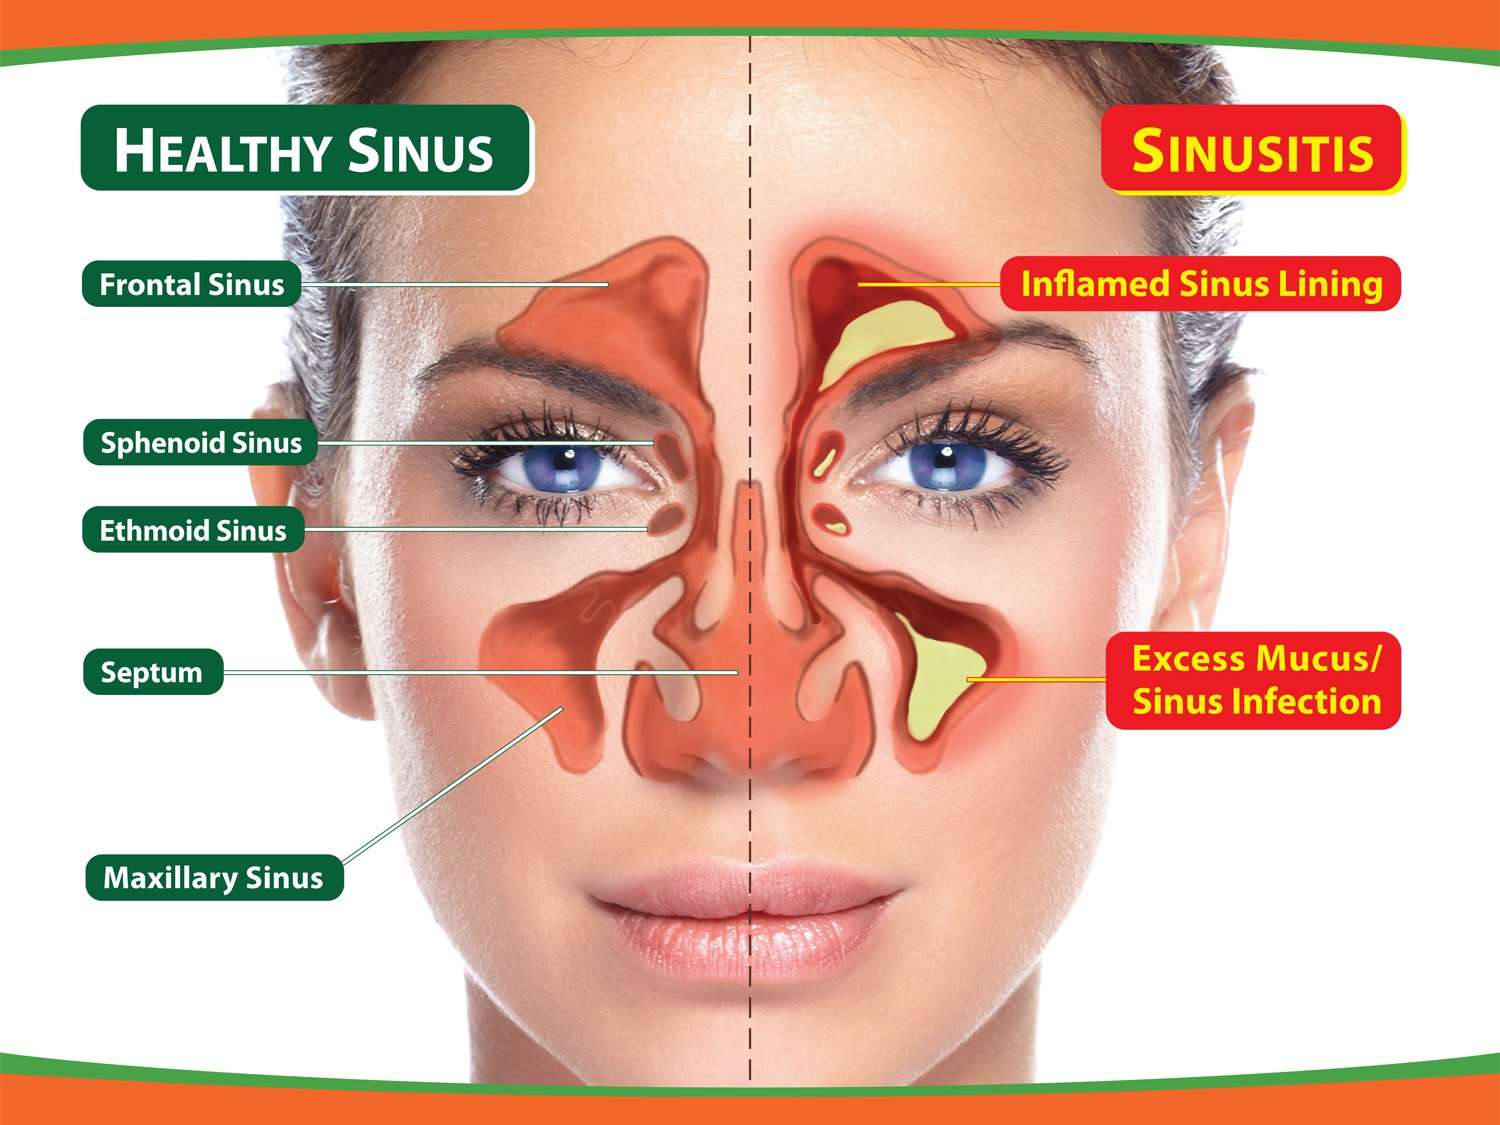 New Study Finds Sinus Surgery Improves Sleep Quality